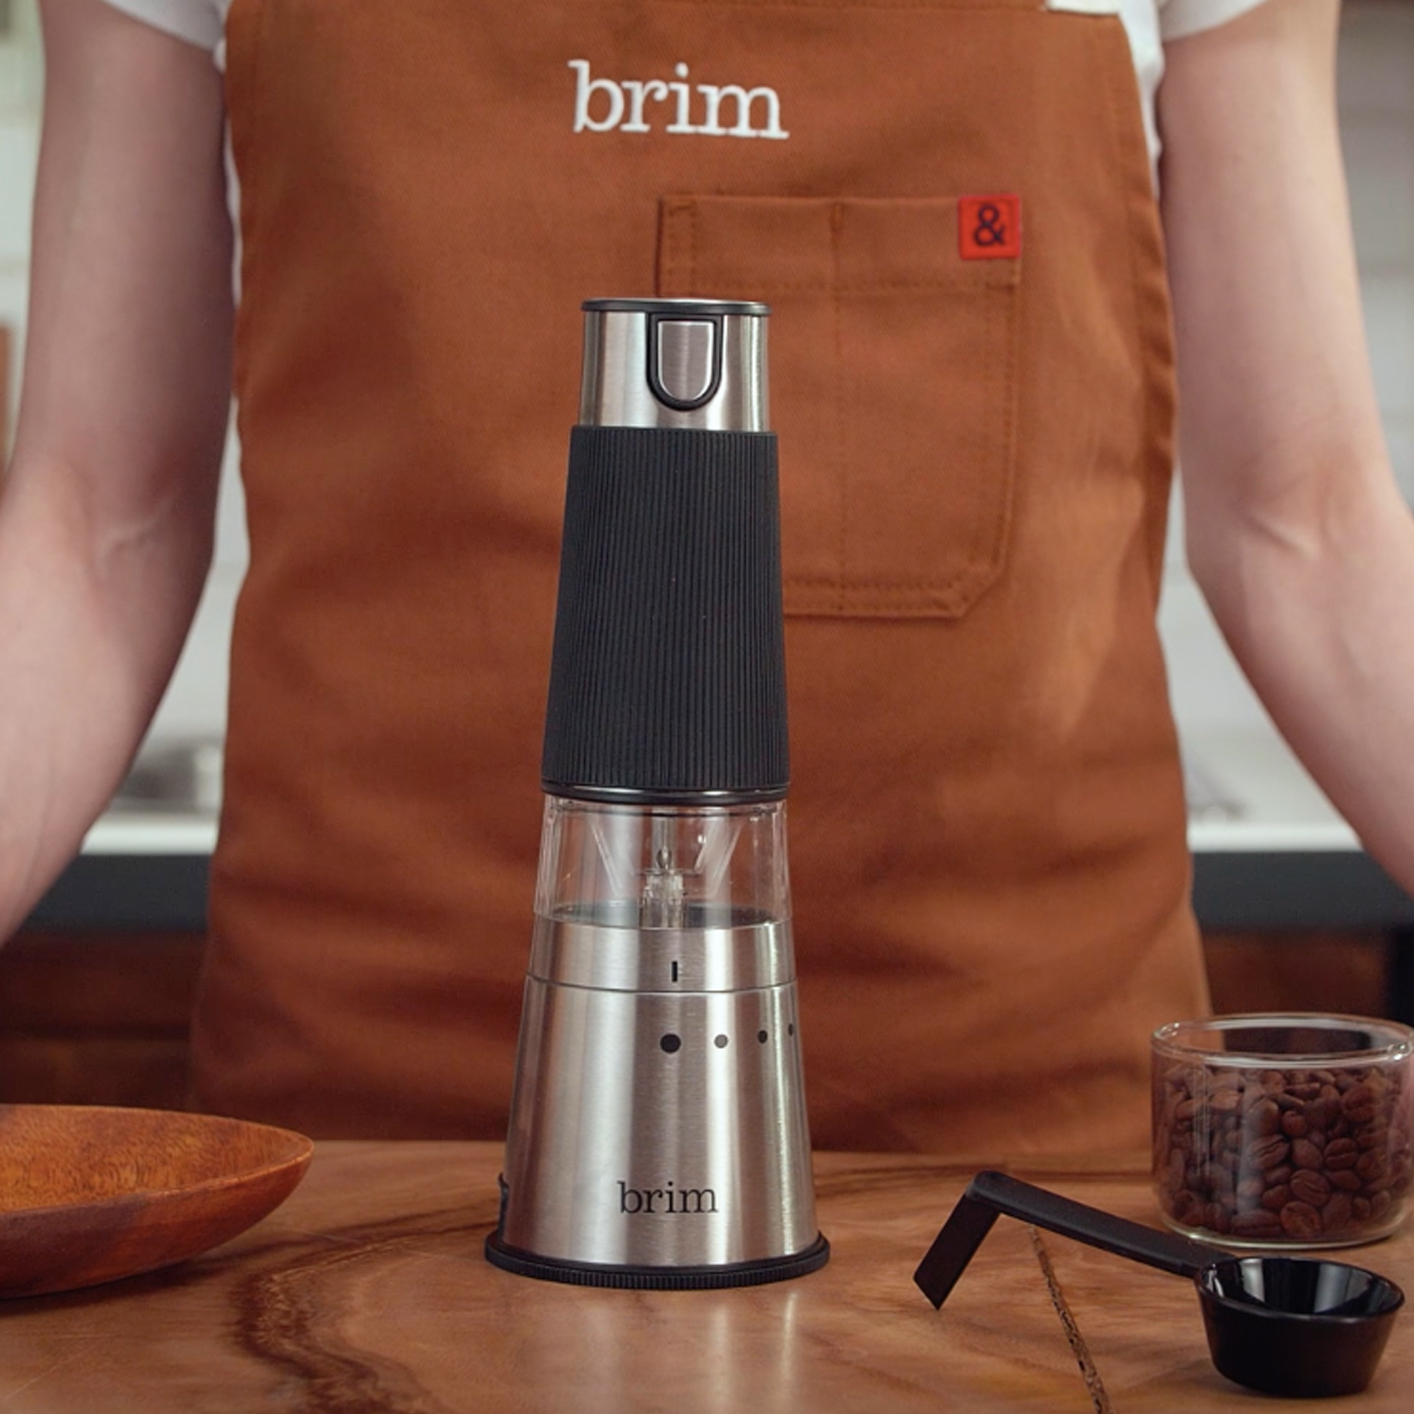 Electric Compact Coffee Grinder